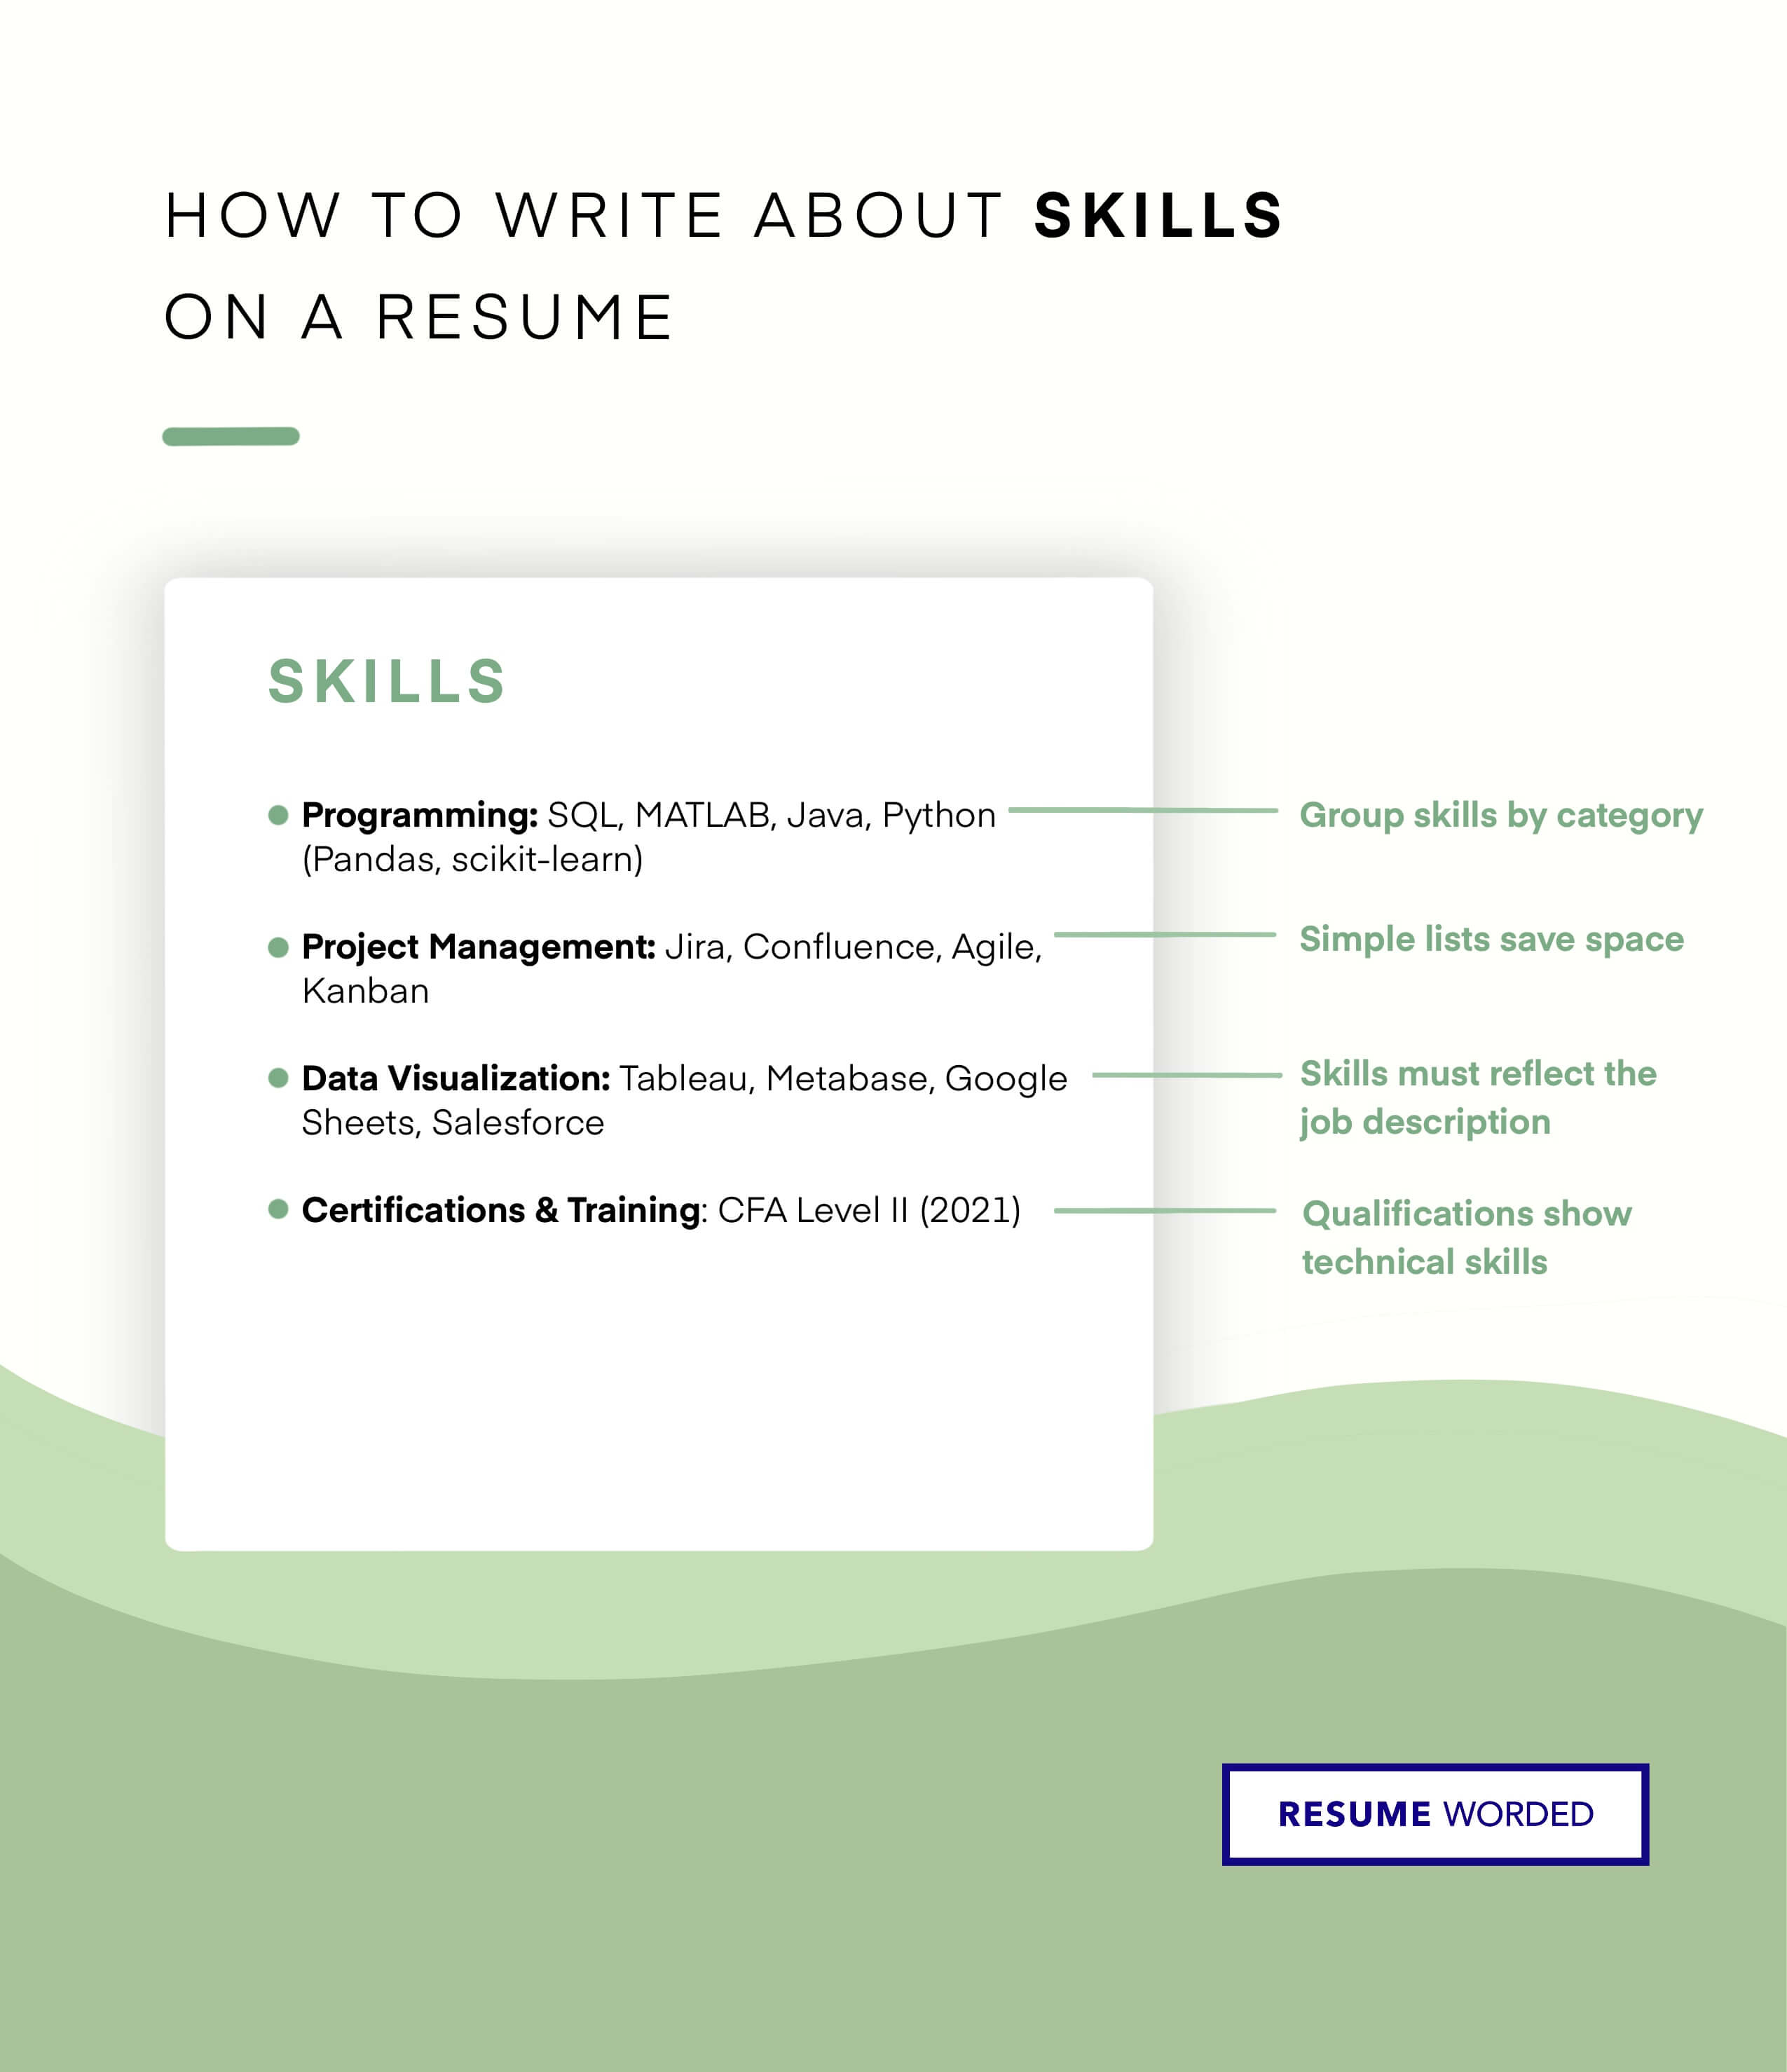 Include hobbies and activities where you used recruiter skills. - Junior Recruiter Resume